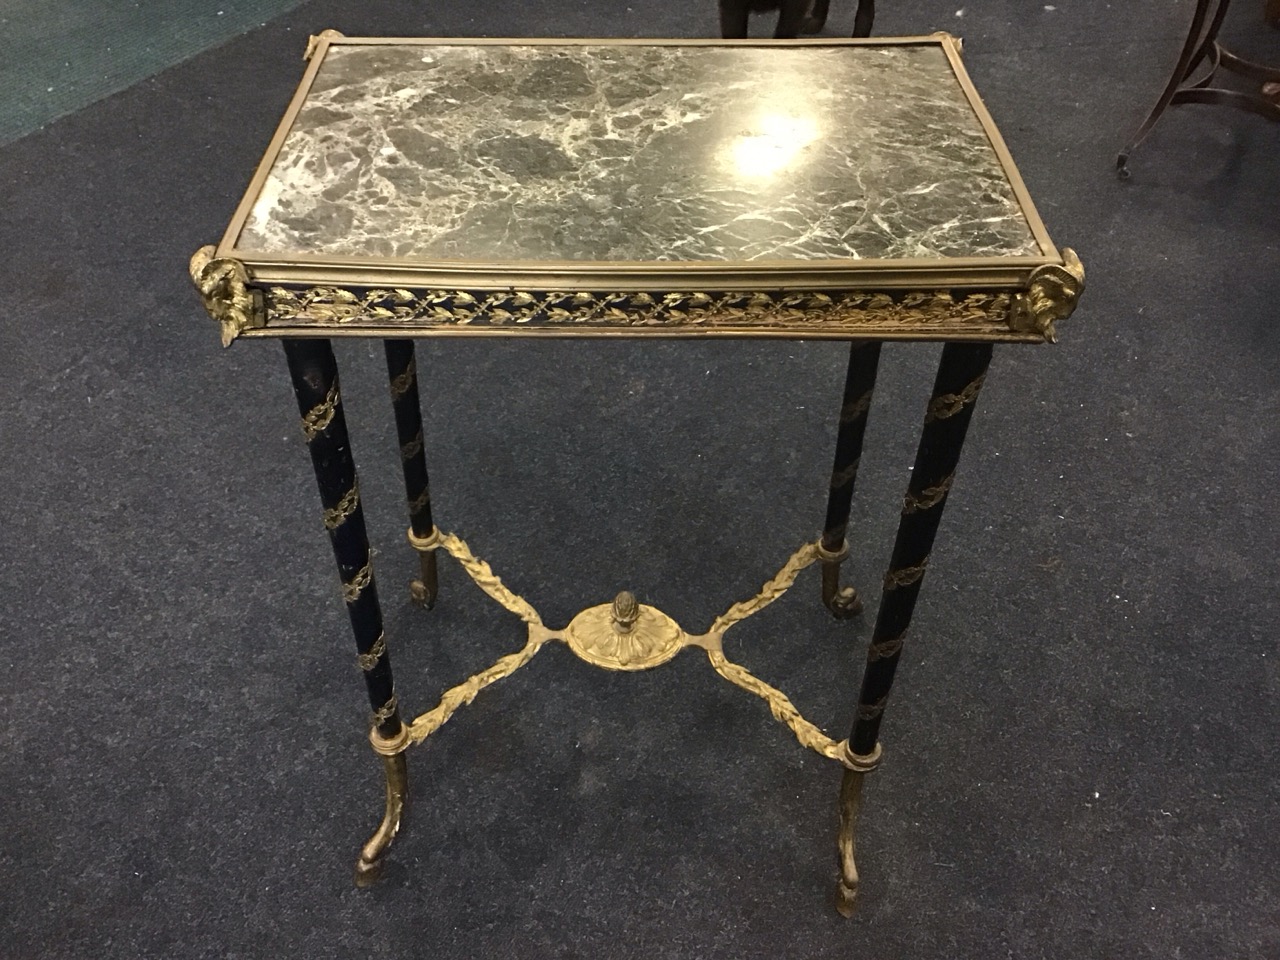 A C19th rectangular Louis XVI style marble top ebonised and ormolu mounted guéridon centre table - Image 2 of 3